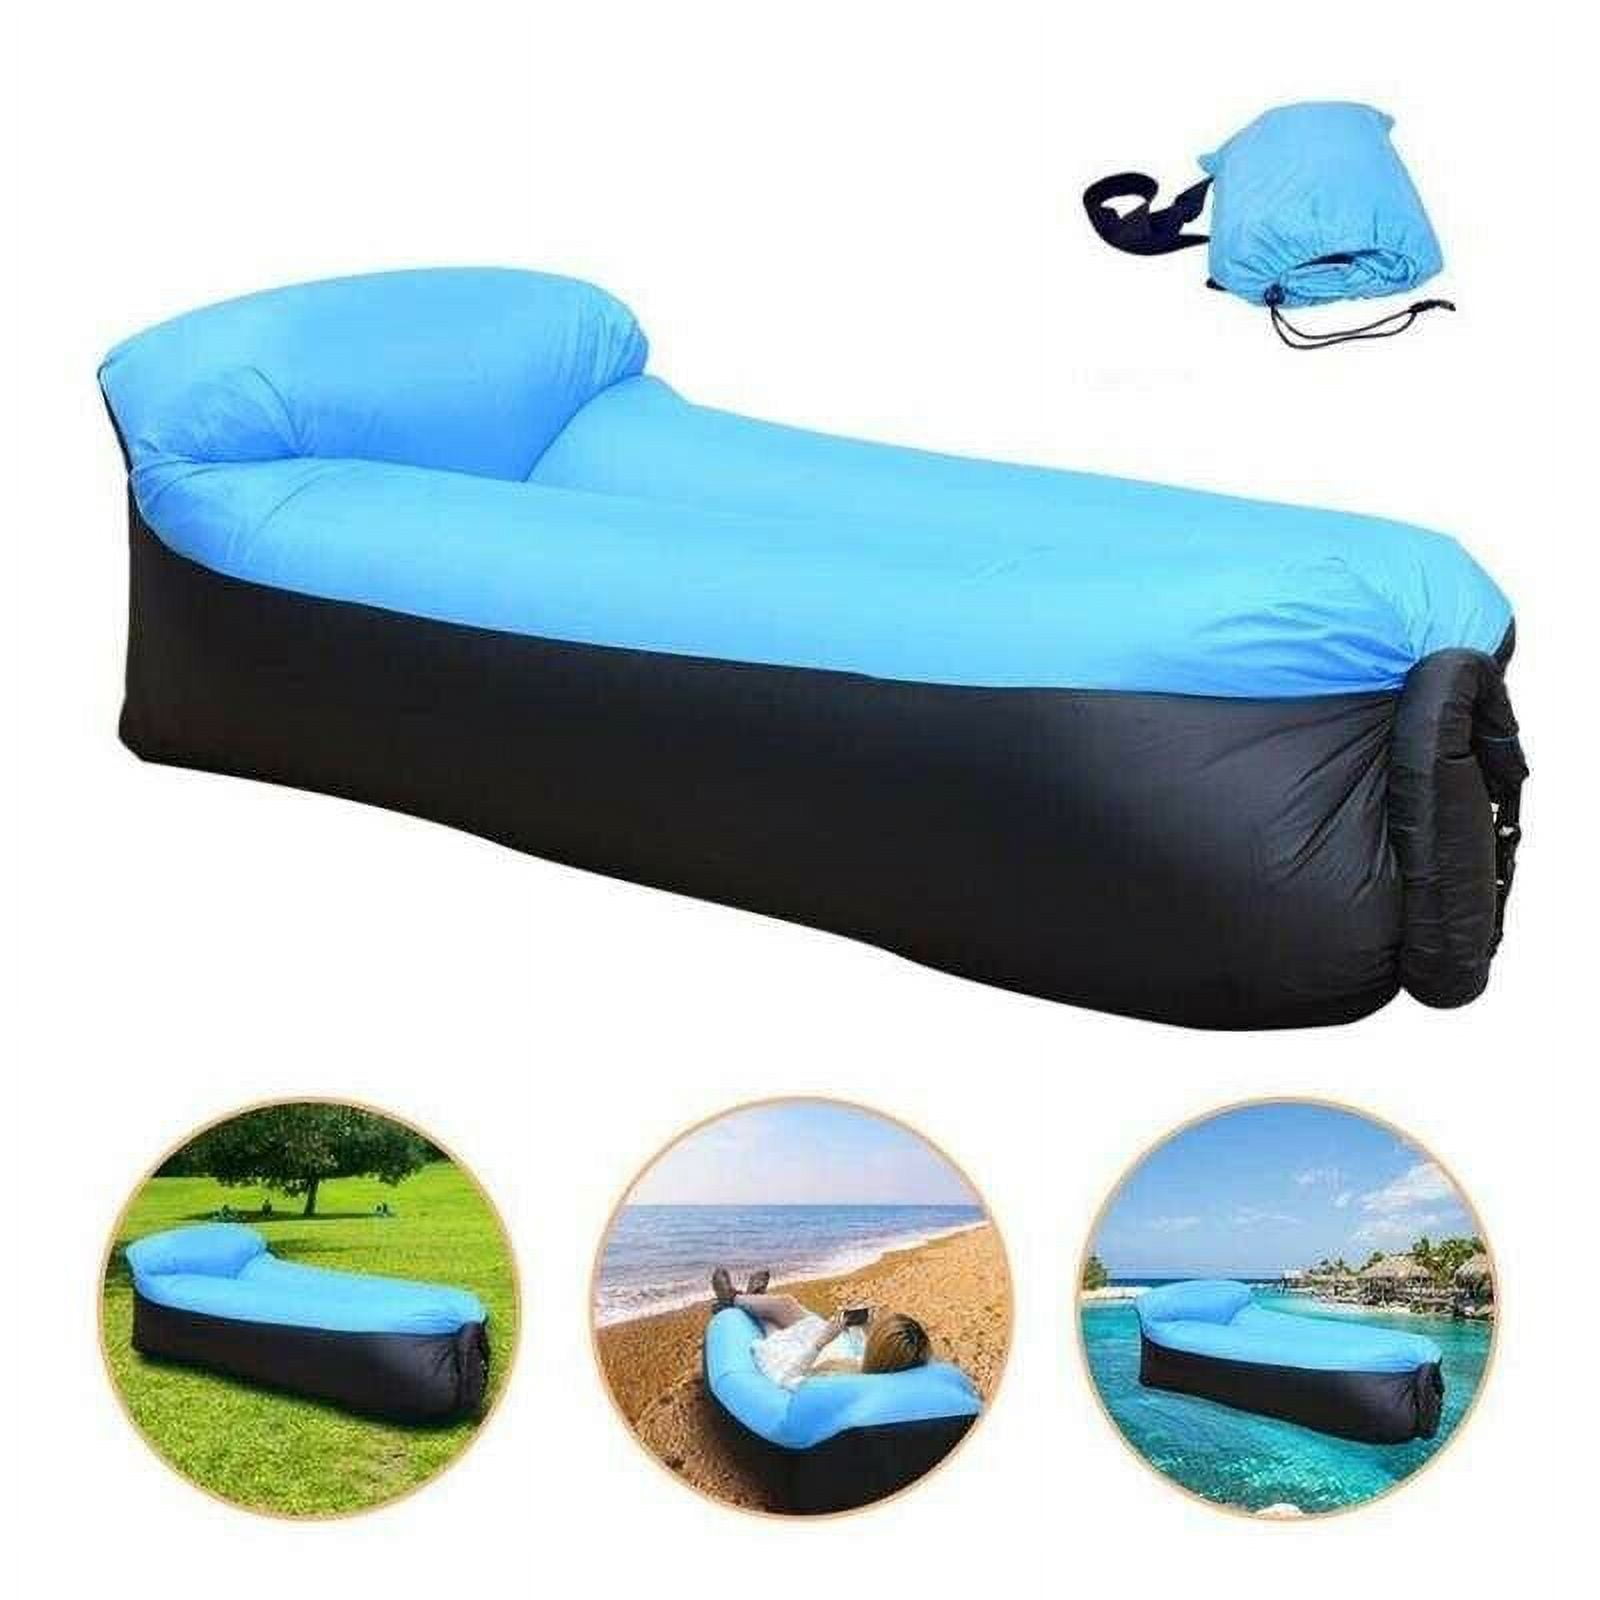  BNY Inflatable Lounger Chair Sofa Bed Air Sofa Sleeping Bag  Couch Beans for Bean Bag Chair for Beach Camping Park BBQ Music Festivals  (Blue) : Sports & Outdoors